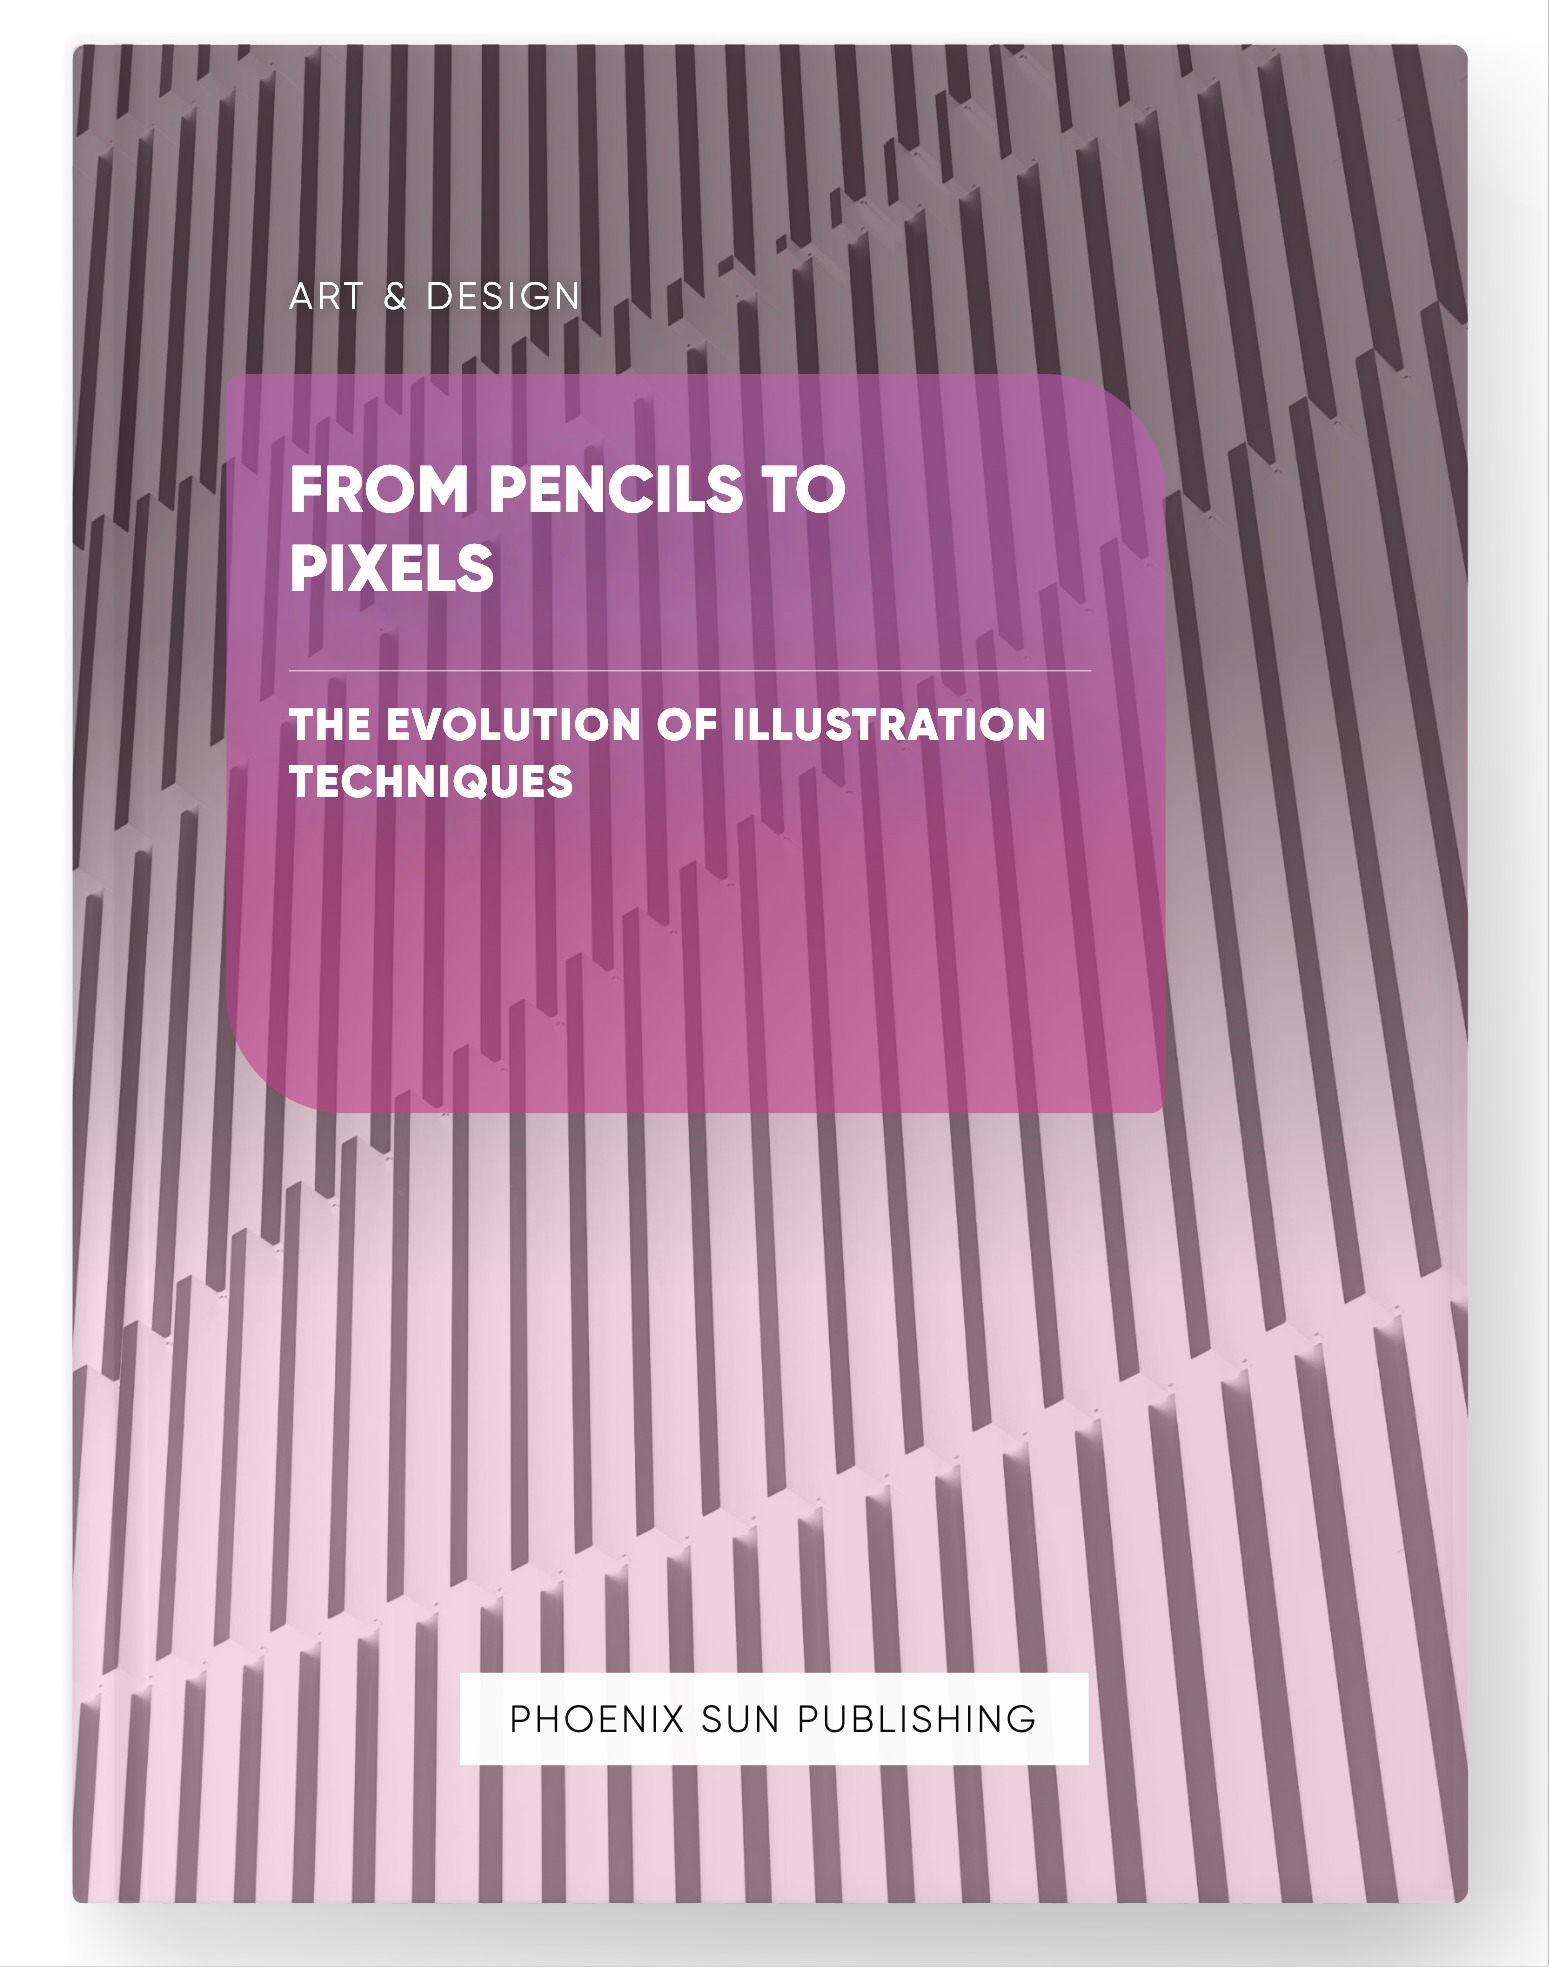 From Pencils to Pixels – The Evolution of Illustration Techniques